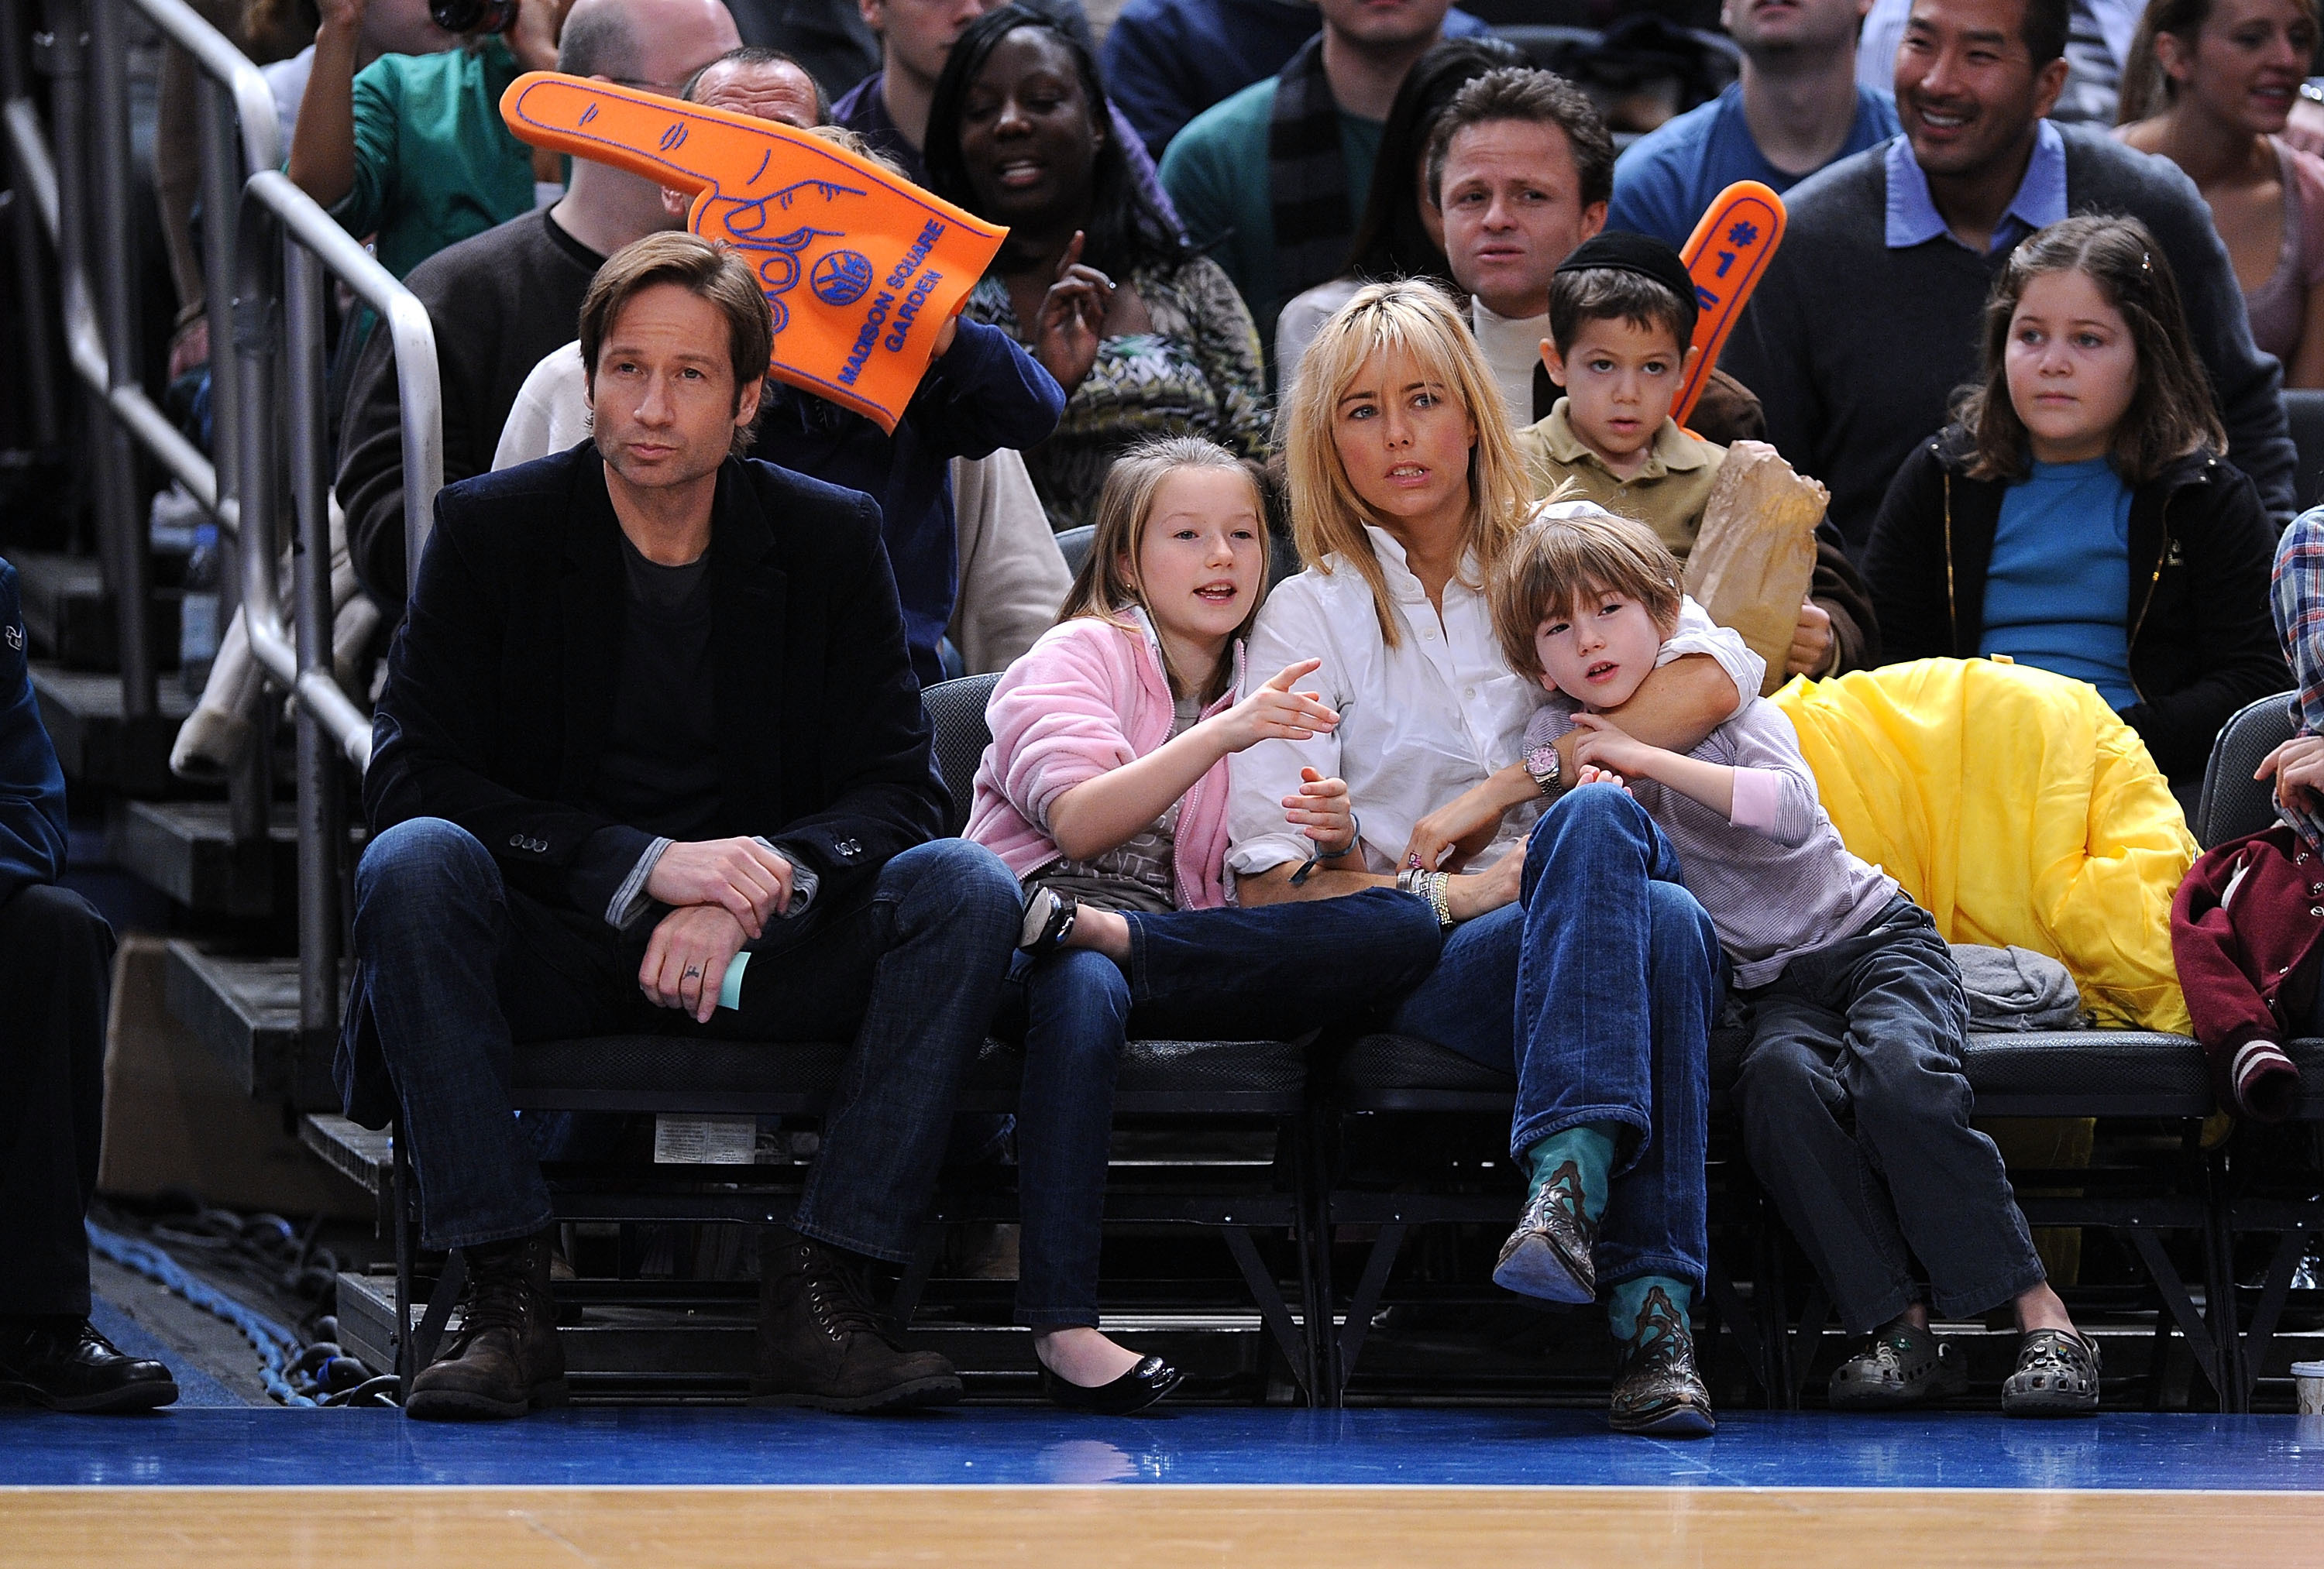 <p>David Duchovny and then-wife Tea Leoni brought their kids, daughter Madelaine West (then 9) and son Kyd Miller (then 6), to a Detroit Pistons vs. New York Knicks game at Madison Square Garden in New York City on Dec. 7, 2008.</p>